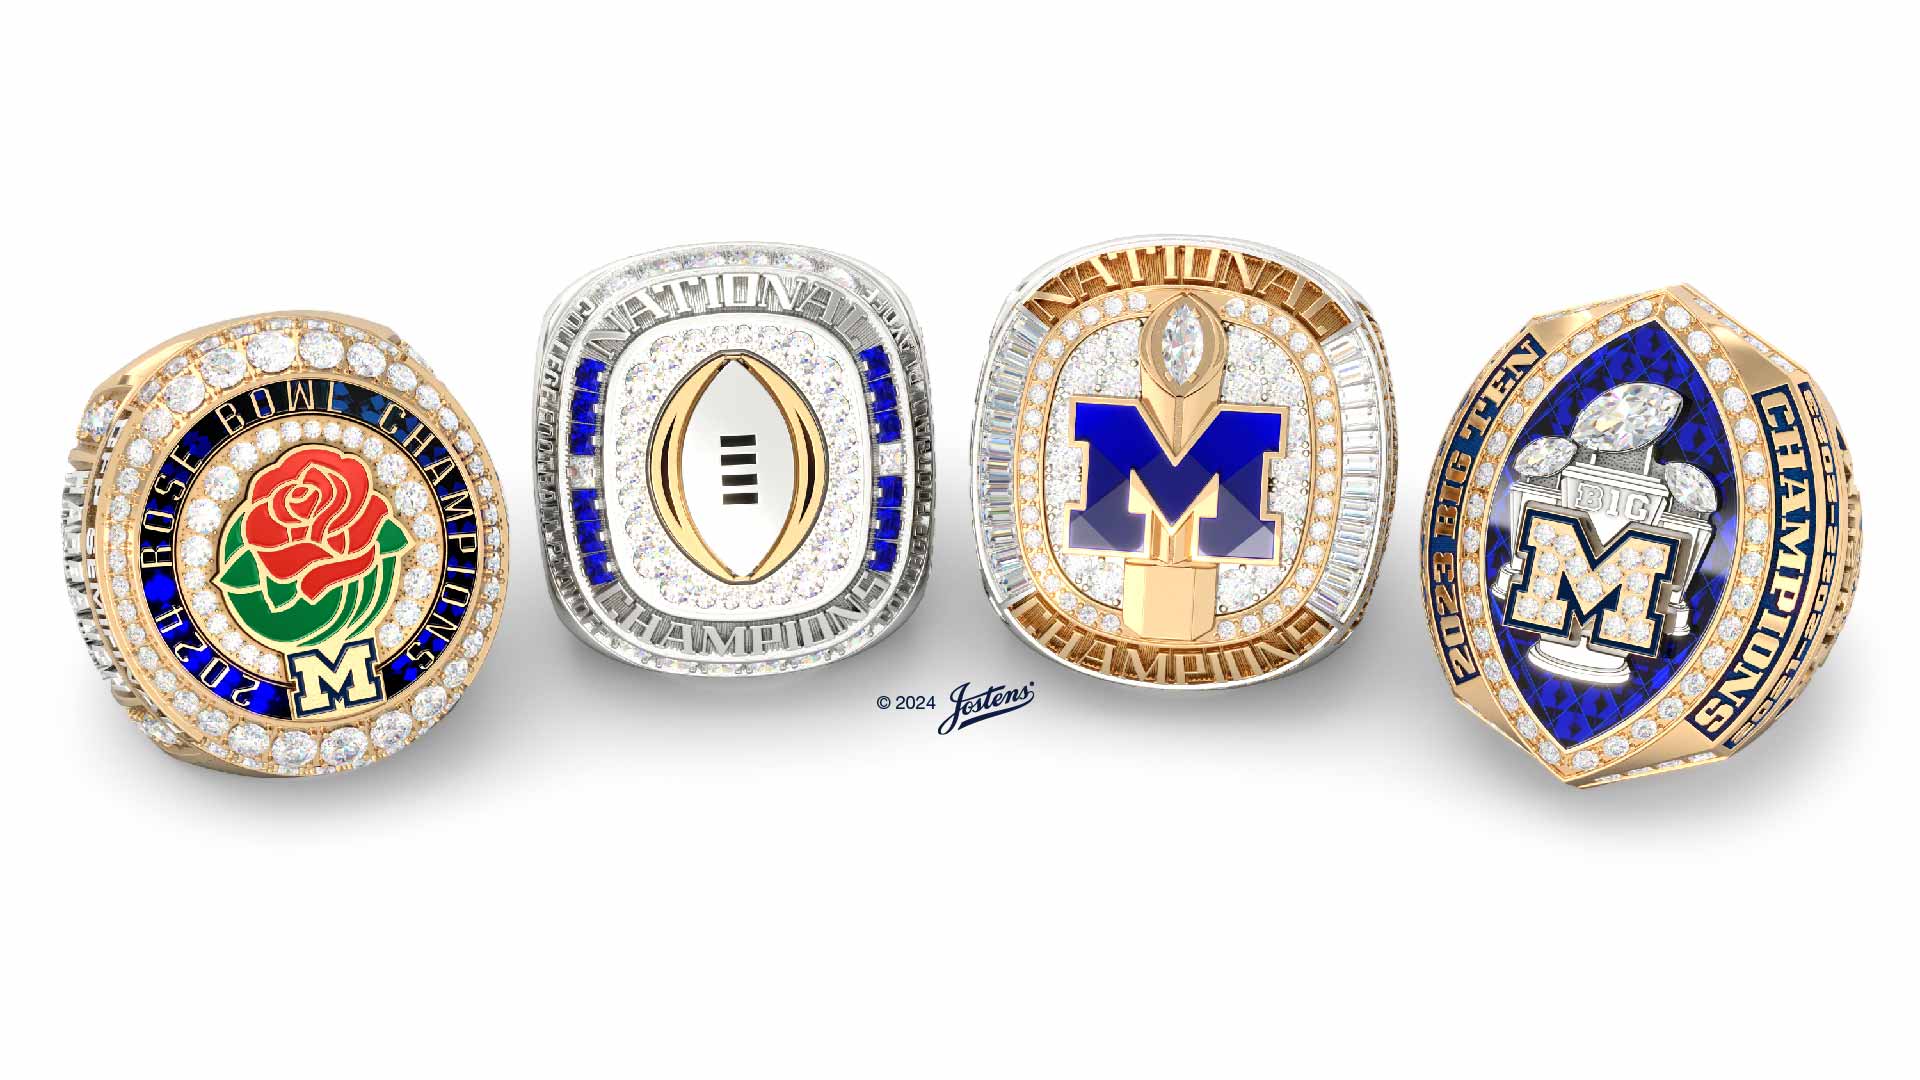 The Rose Bowl Championship Ring, the Official College Football Playoff Championship Ring, the National Championship Ring, and the Big Ten Championship Ring